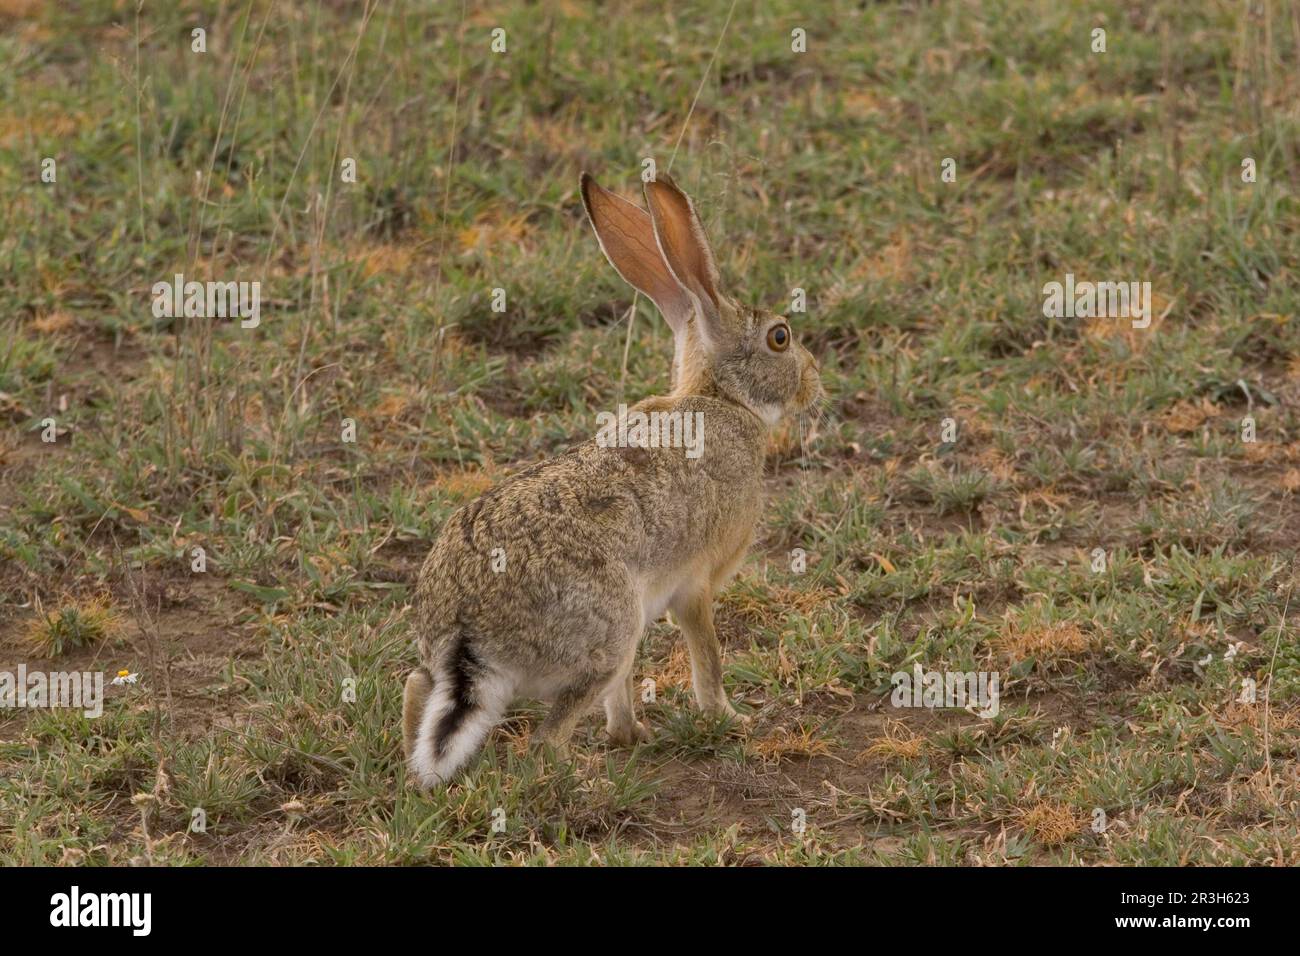 Cape hare, Cape hare, Desert hares, Cape hares (Lepus capensis), Hares, Rodents, Mammals, Animals Hare, Tanzania Sitting, Alert Stock Photo